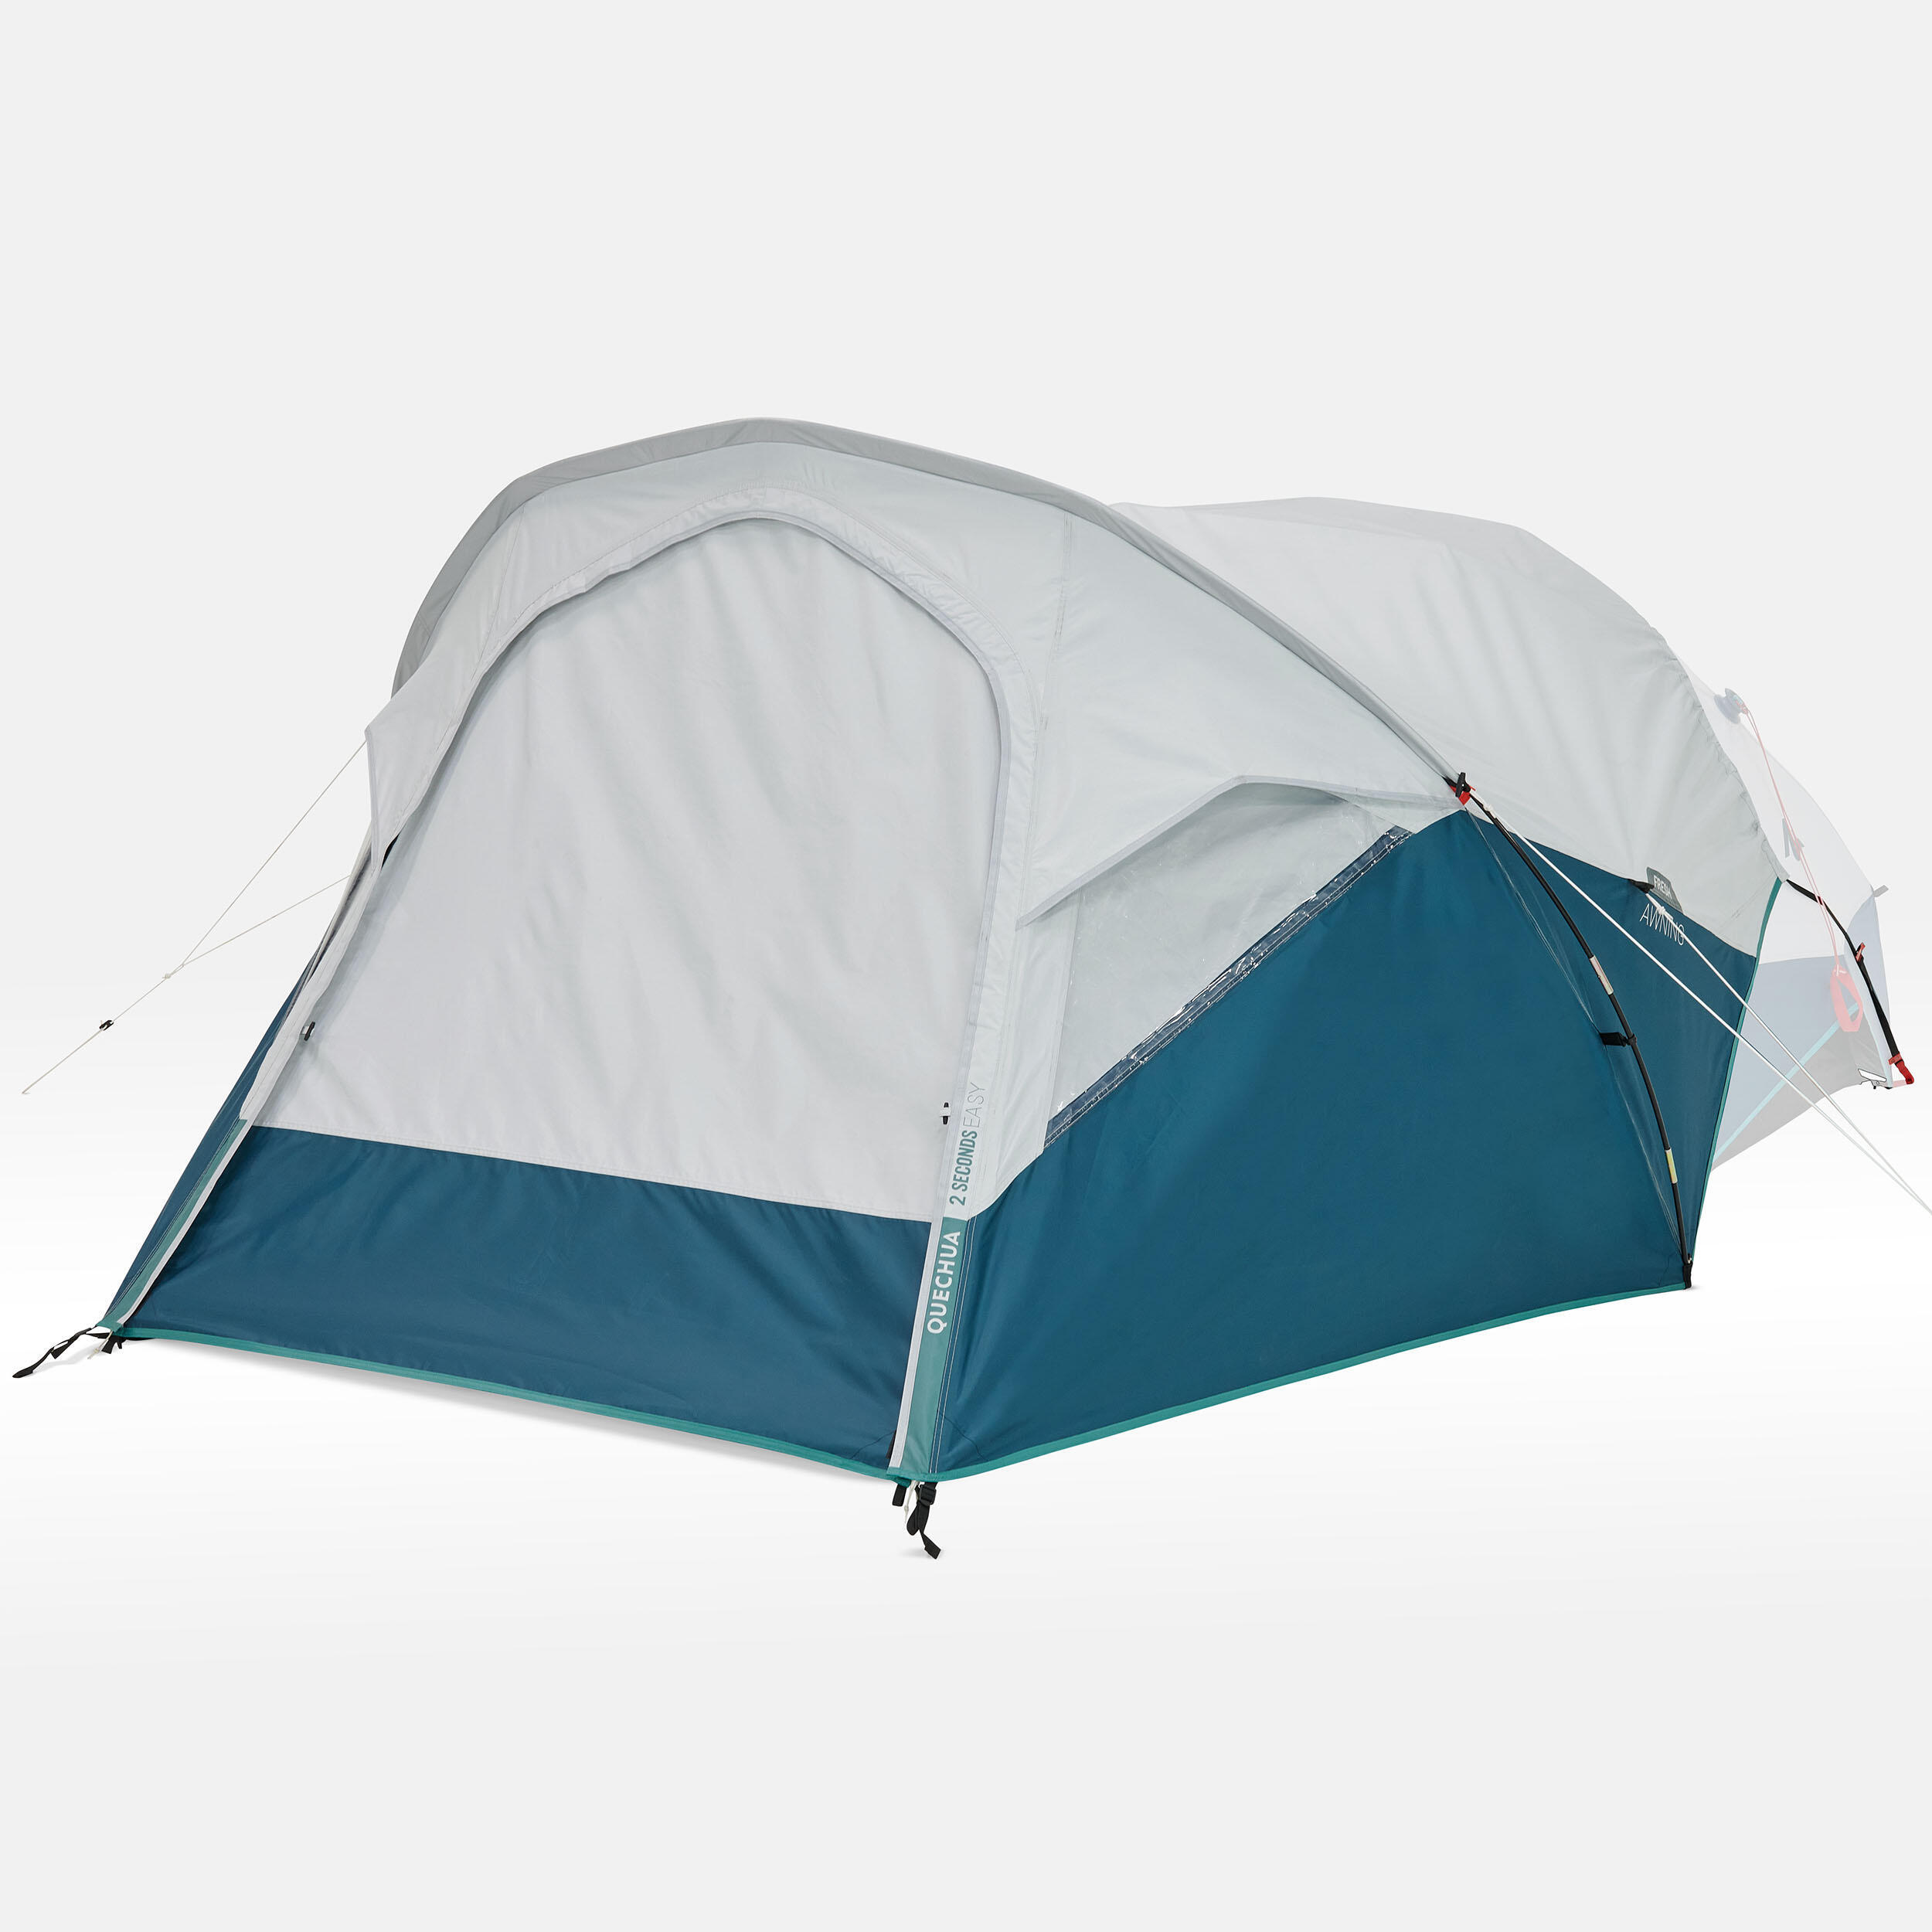 Camping awning - 2 Seconds EASY - Fresh 6/20